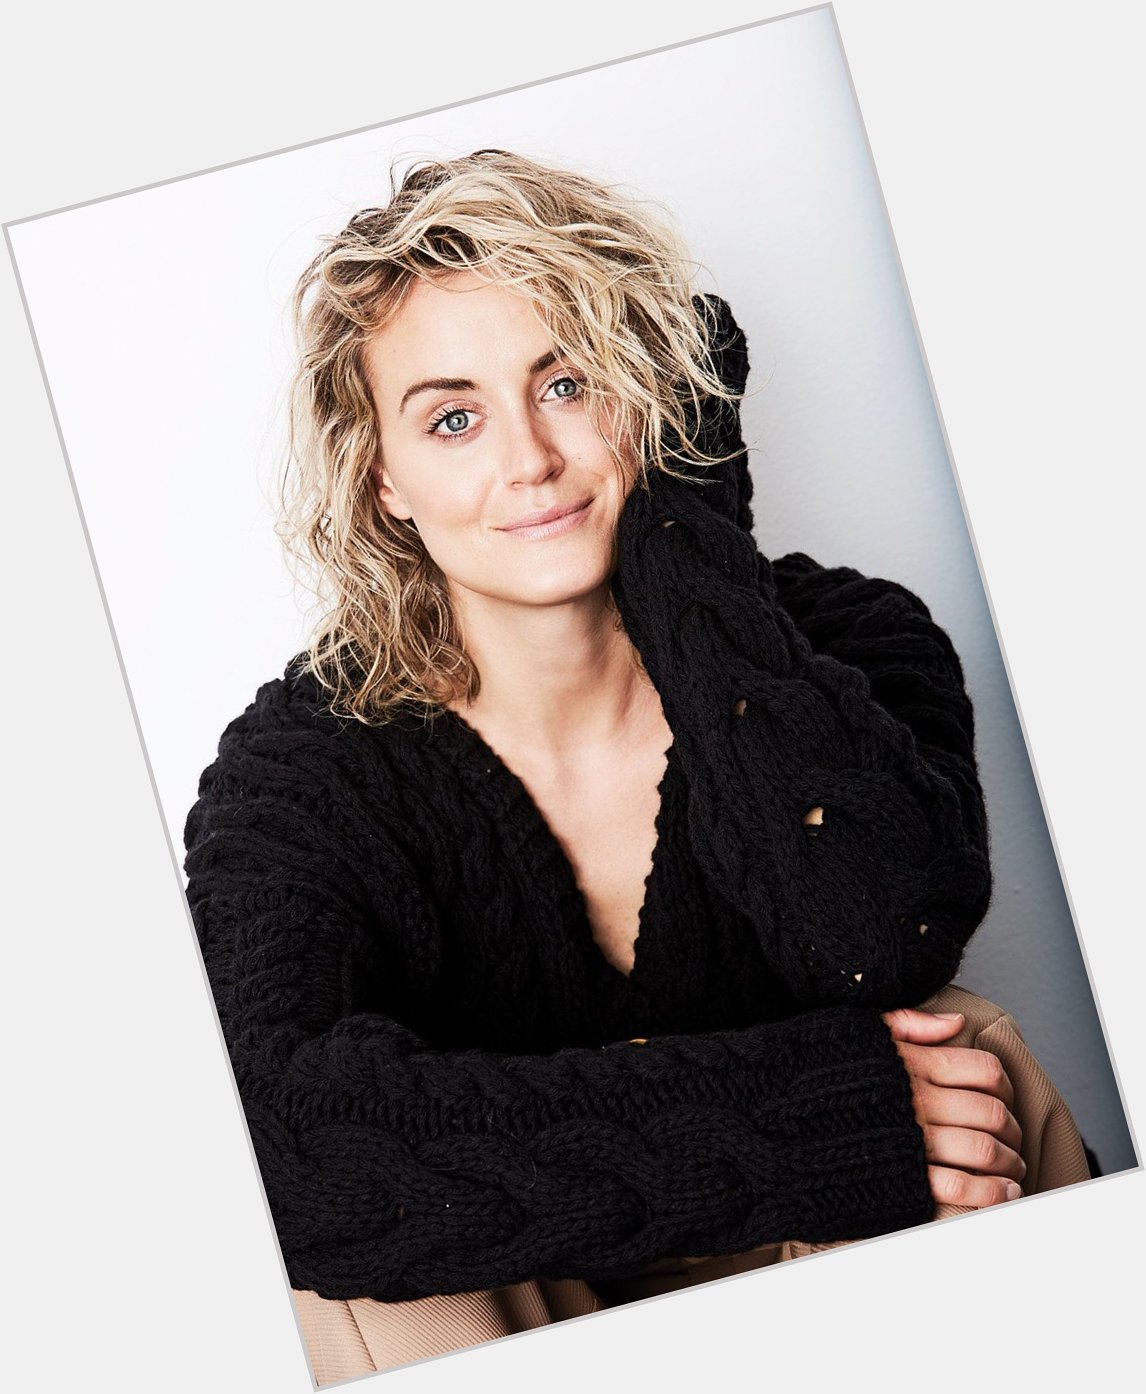 Happy belated birthday to the wonderful and beautiful taylor schilling  